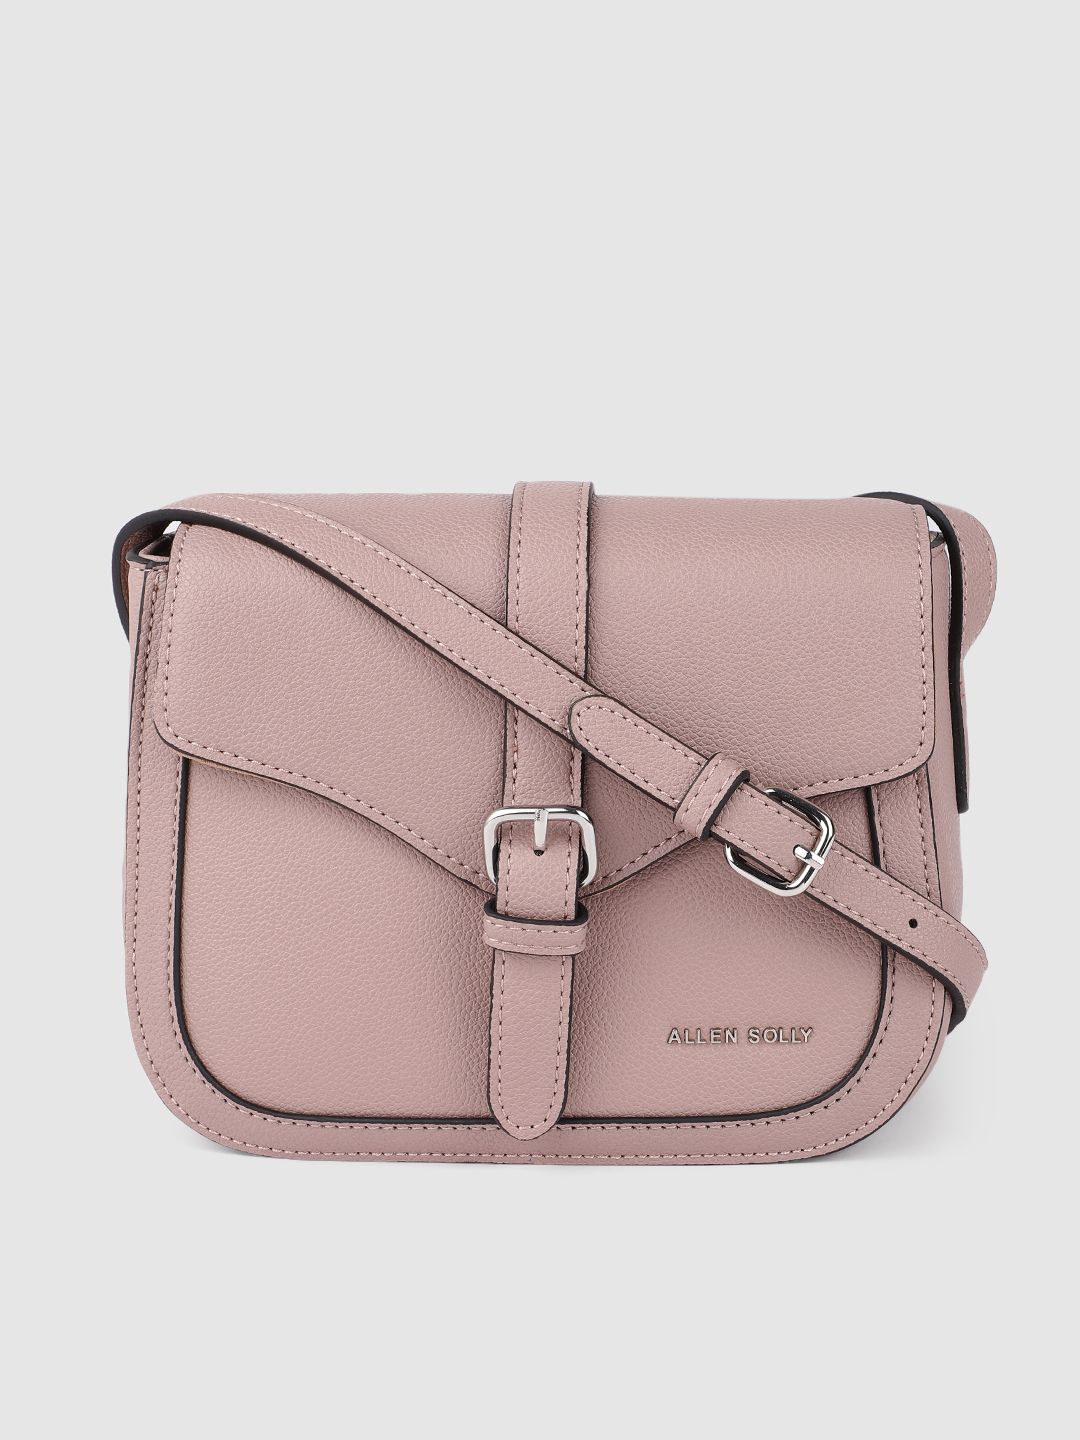 Allen Solly Purple PU Structured Sling Bag Price in India